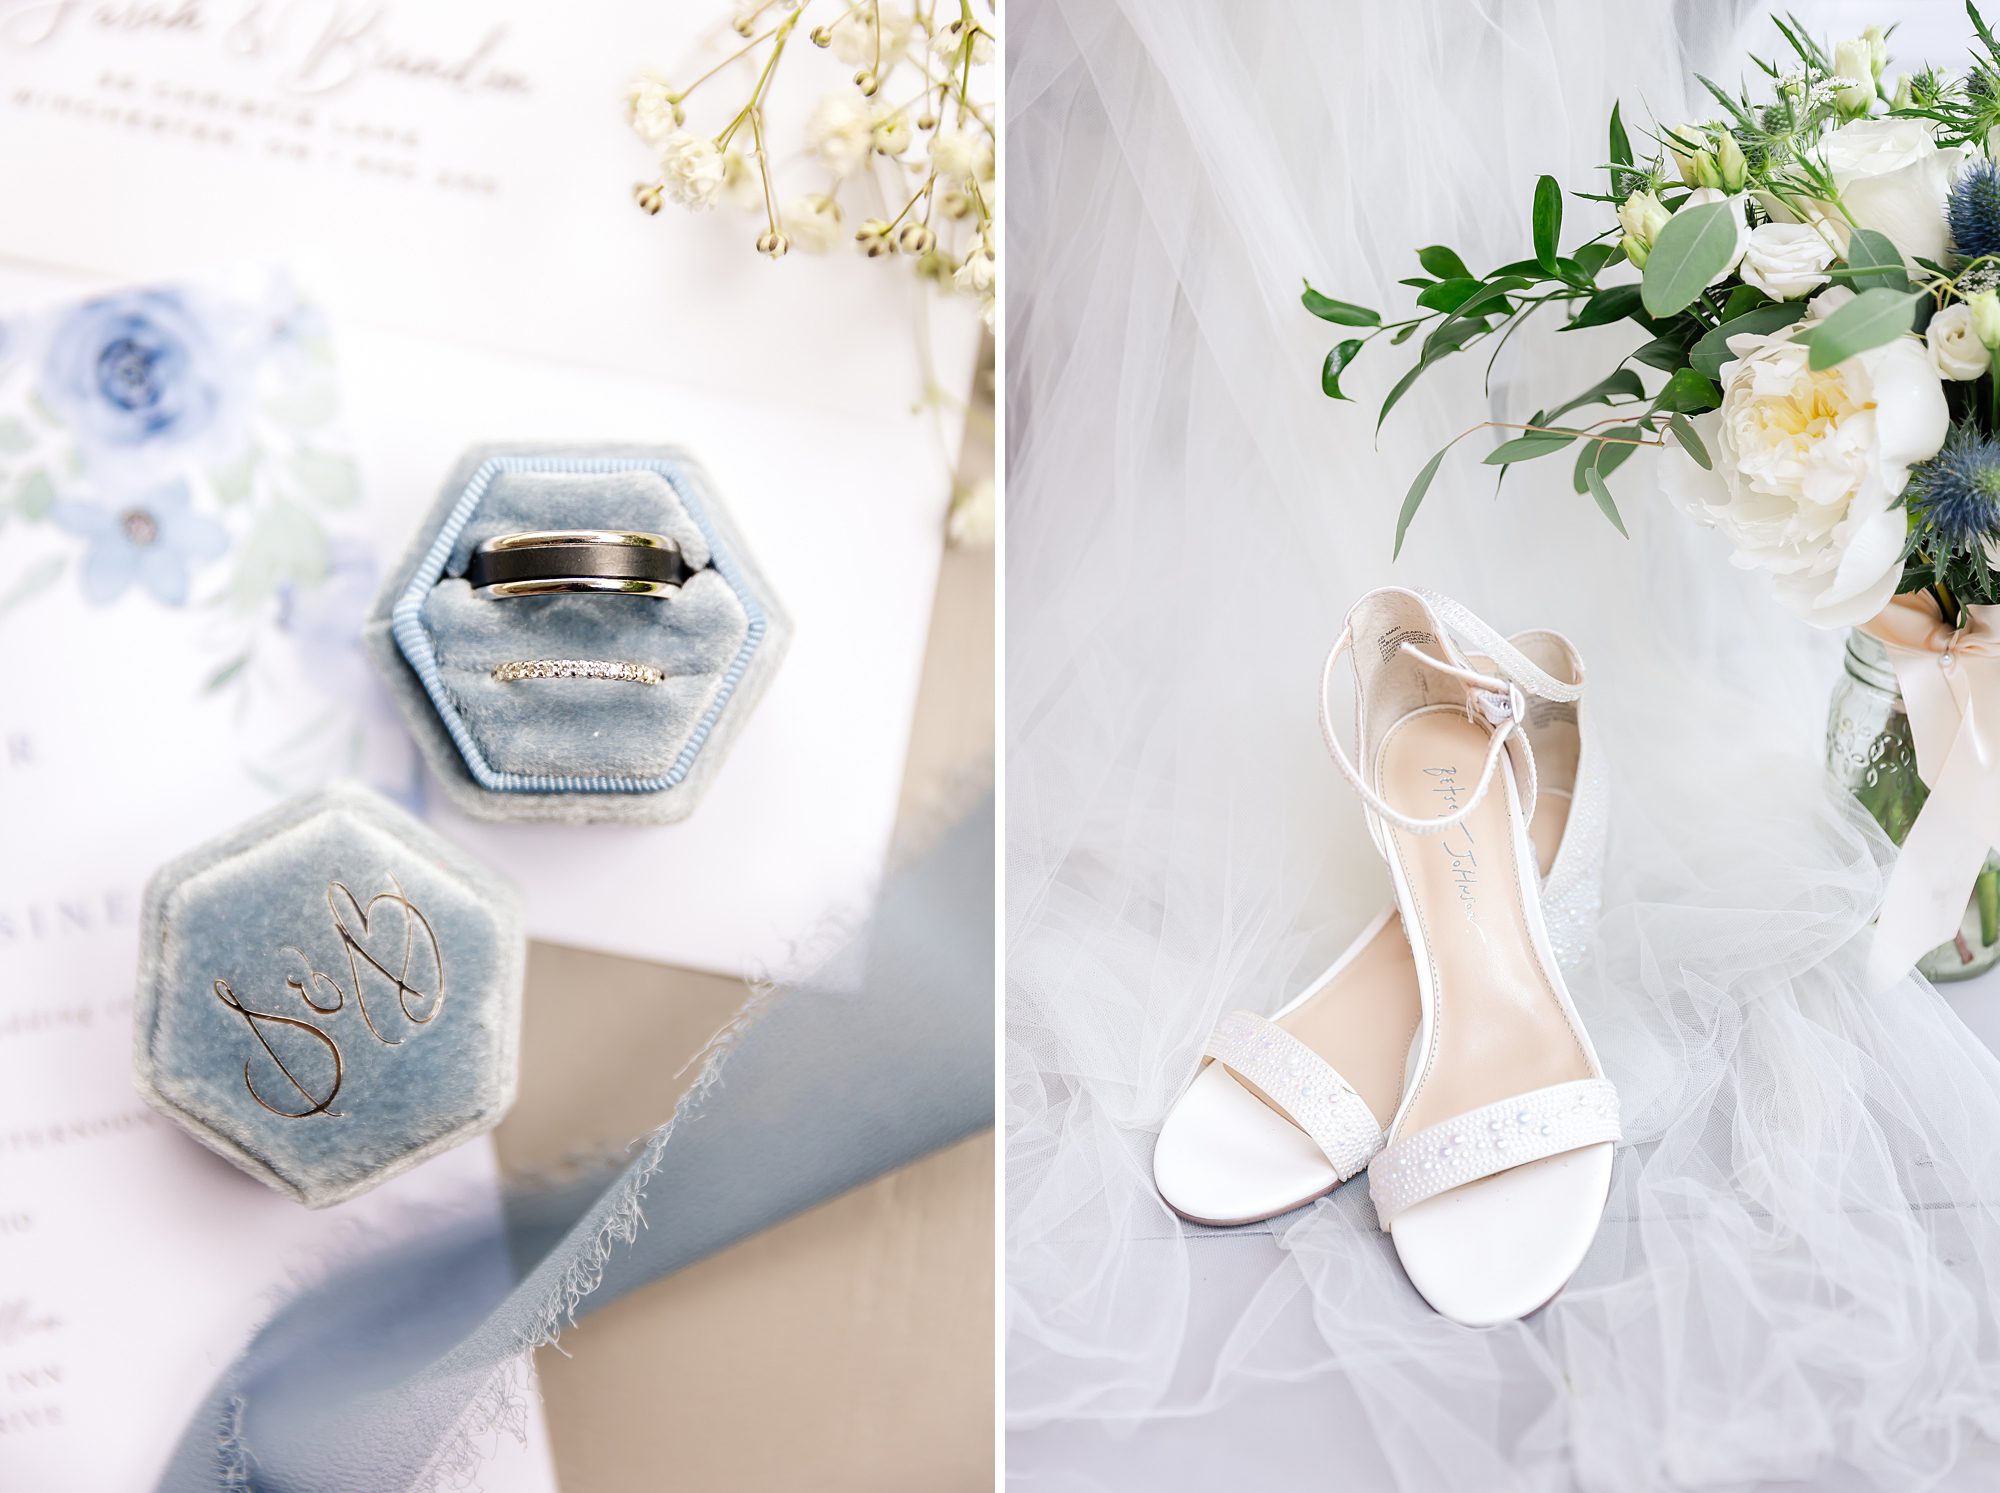 blue wedding details - rings and shoes